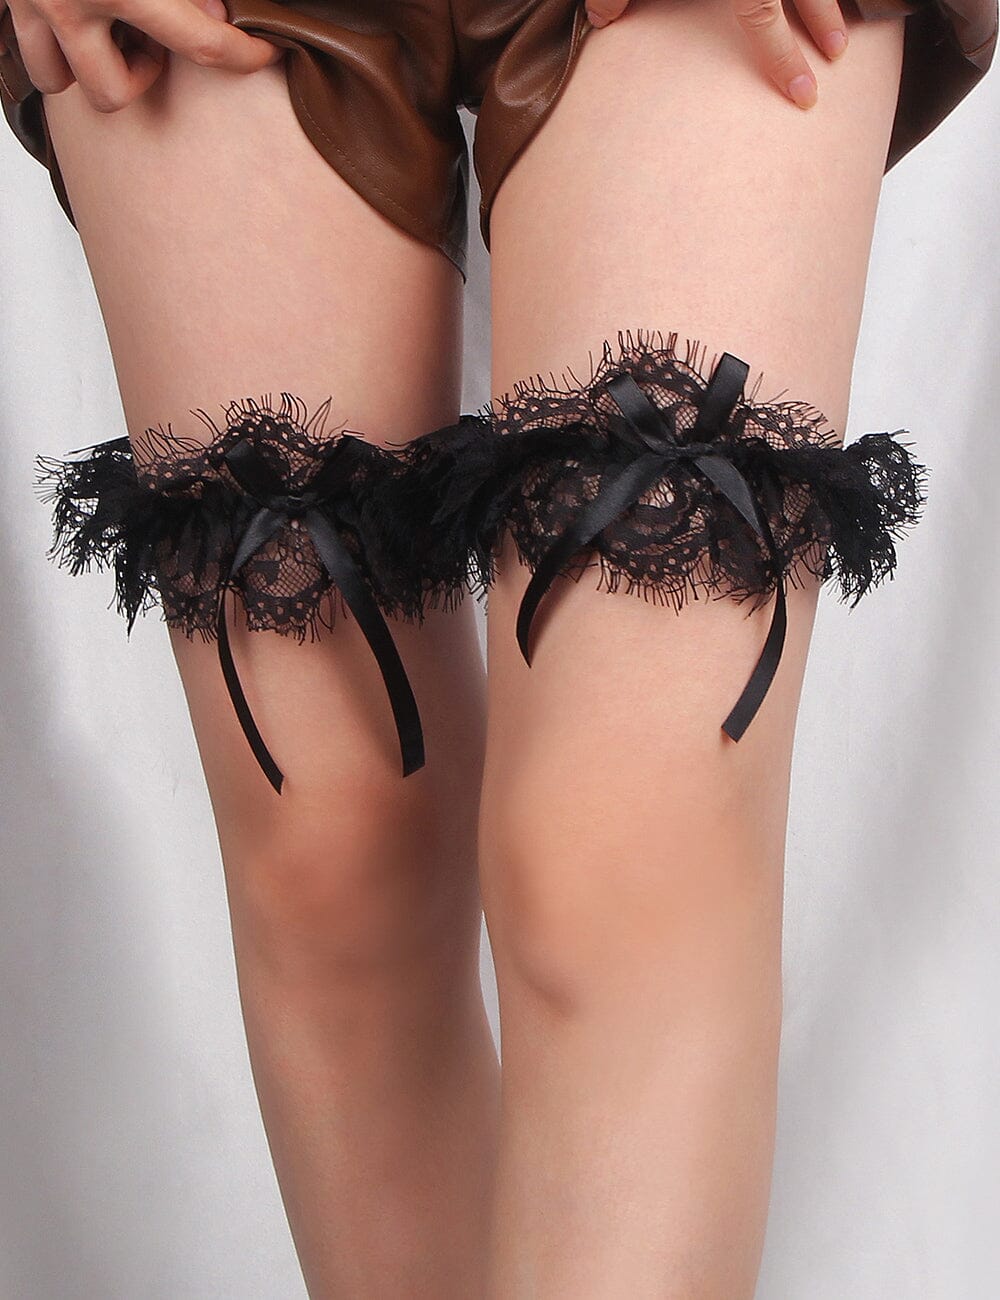 a close up of a person wearing garters